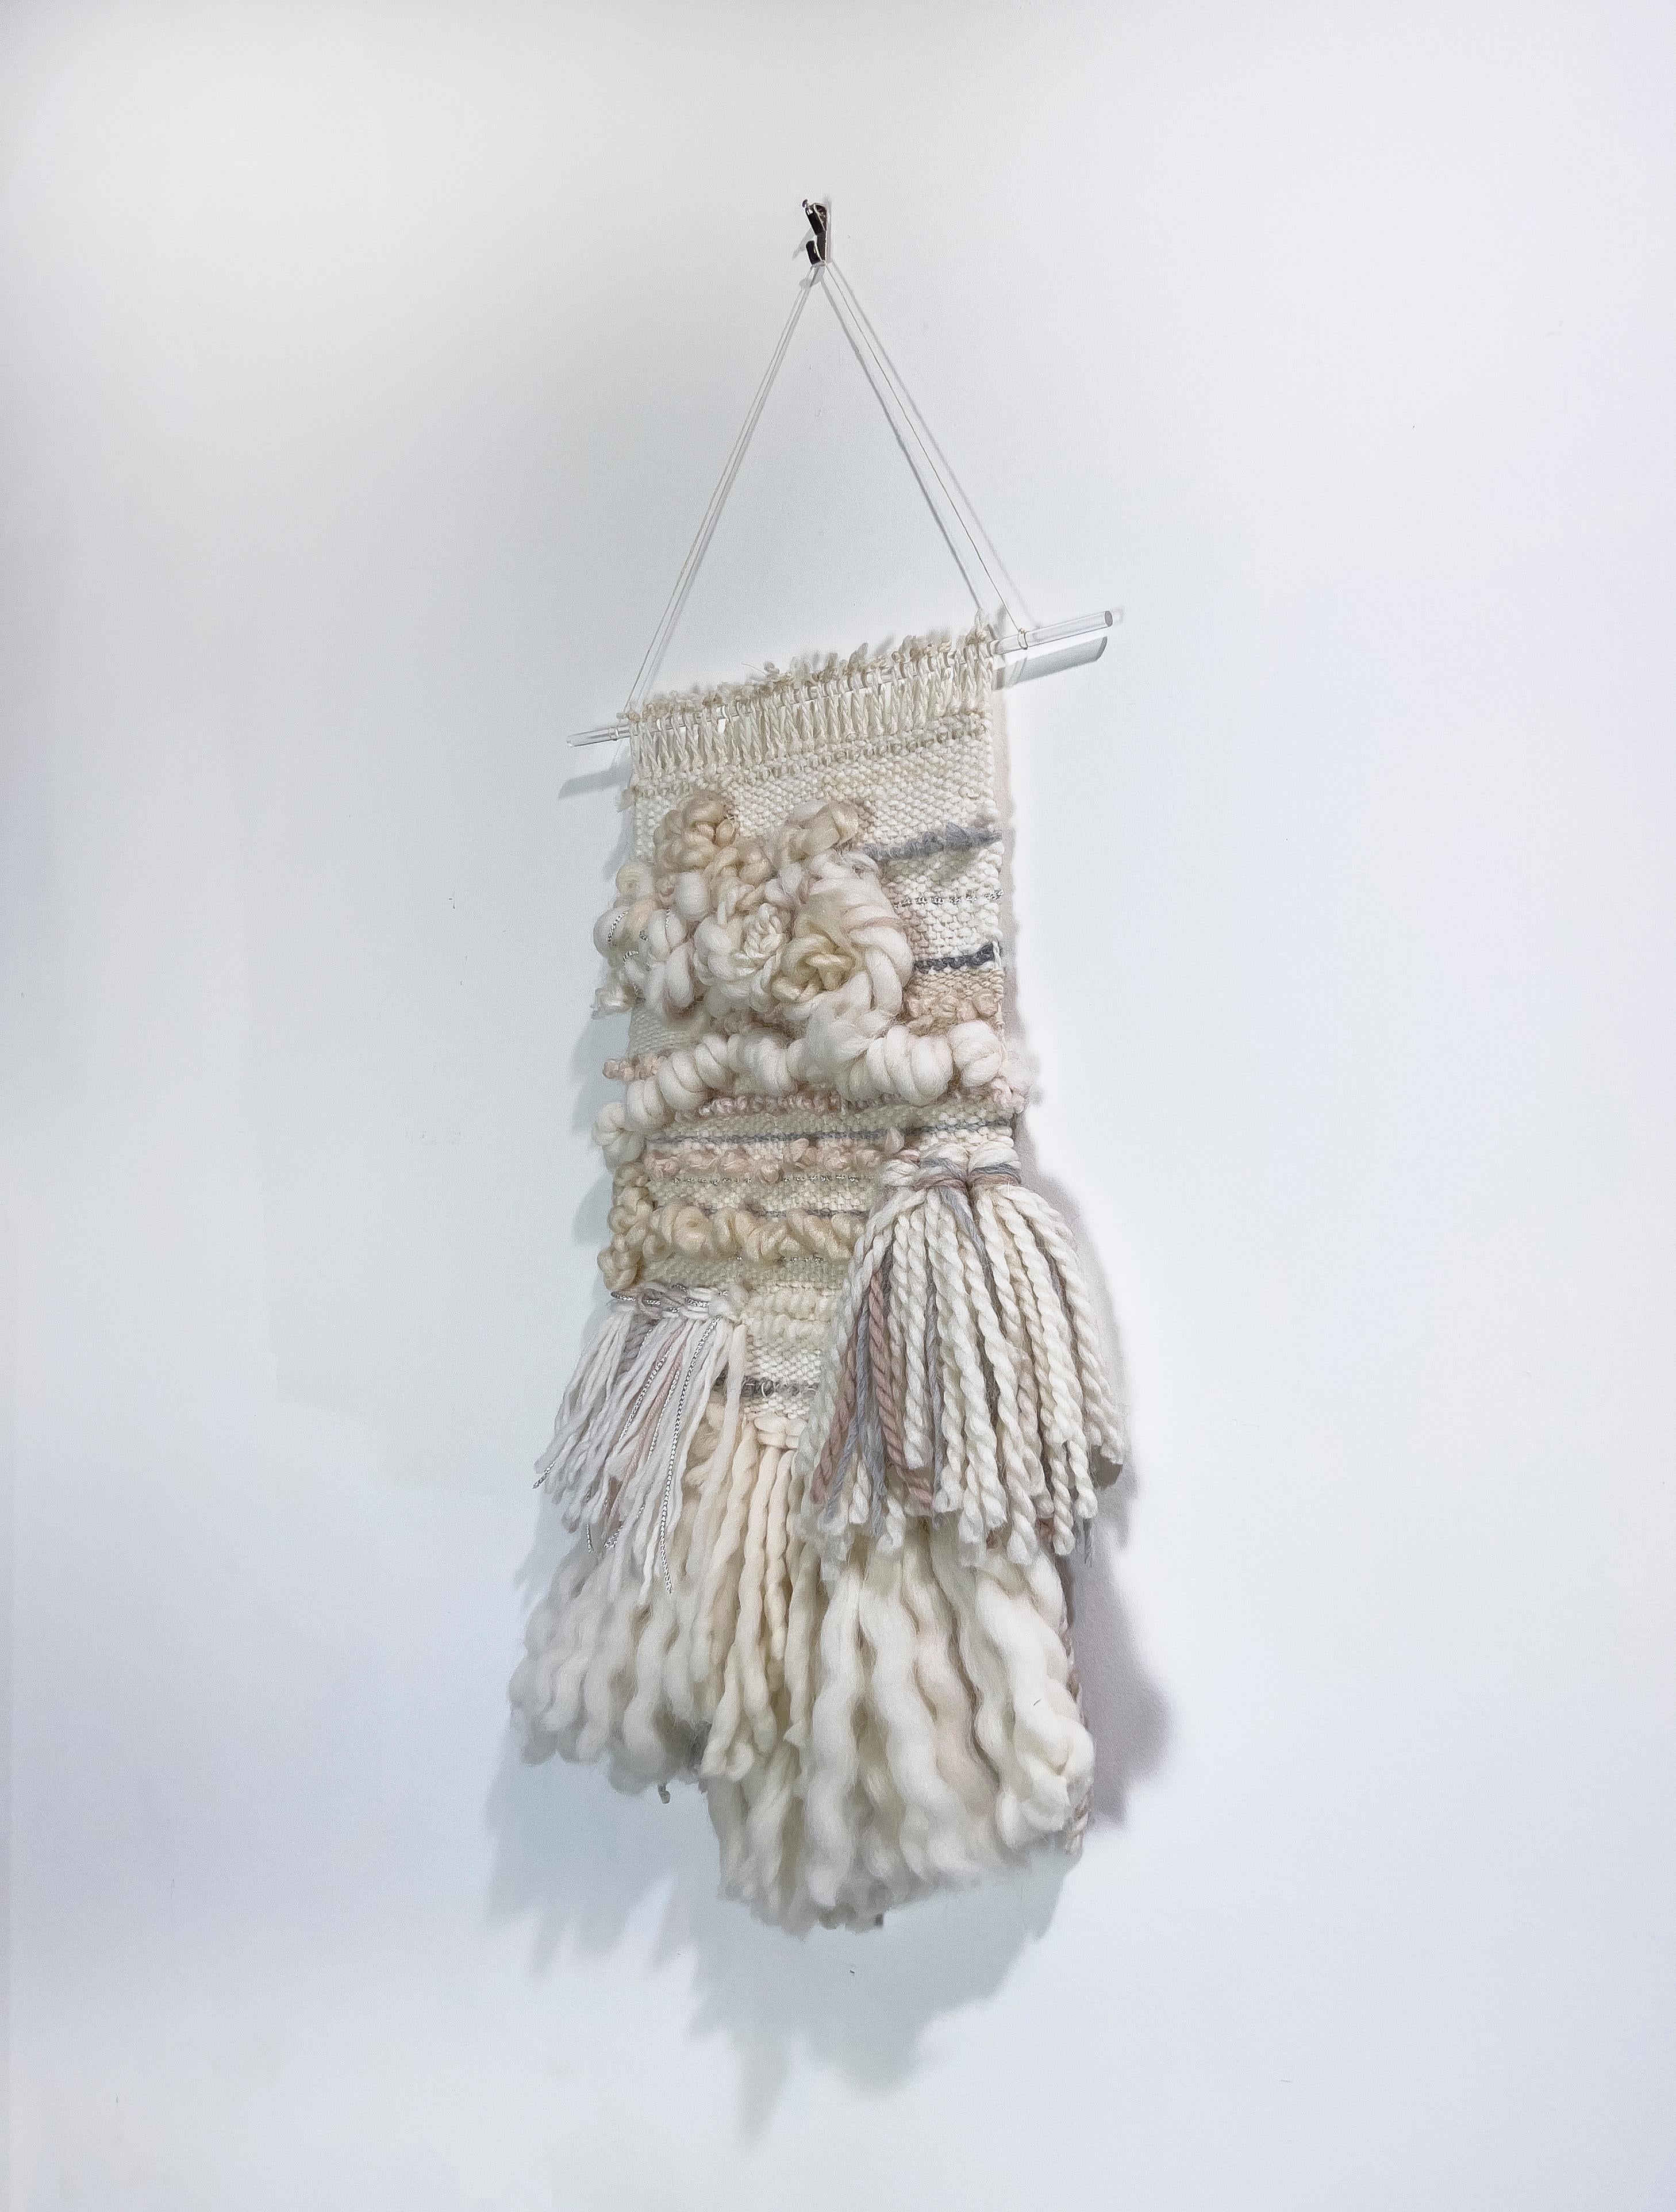 This hand-woven fiber art wall hanging by Dolores Tema is made with light white and cream-toned cotton and Alpaca and Merino wool. The weaving hangs from a clear acrylic rod, suspended by hemp twine. It is ready to hang. 

Dolores Tema studied